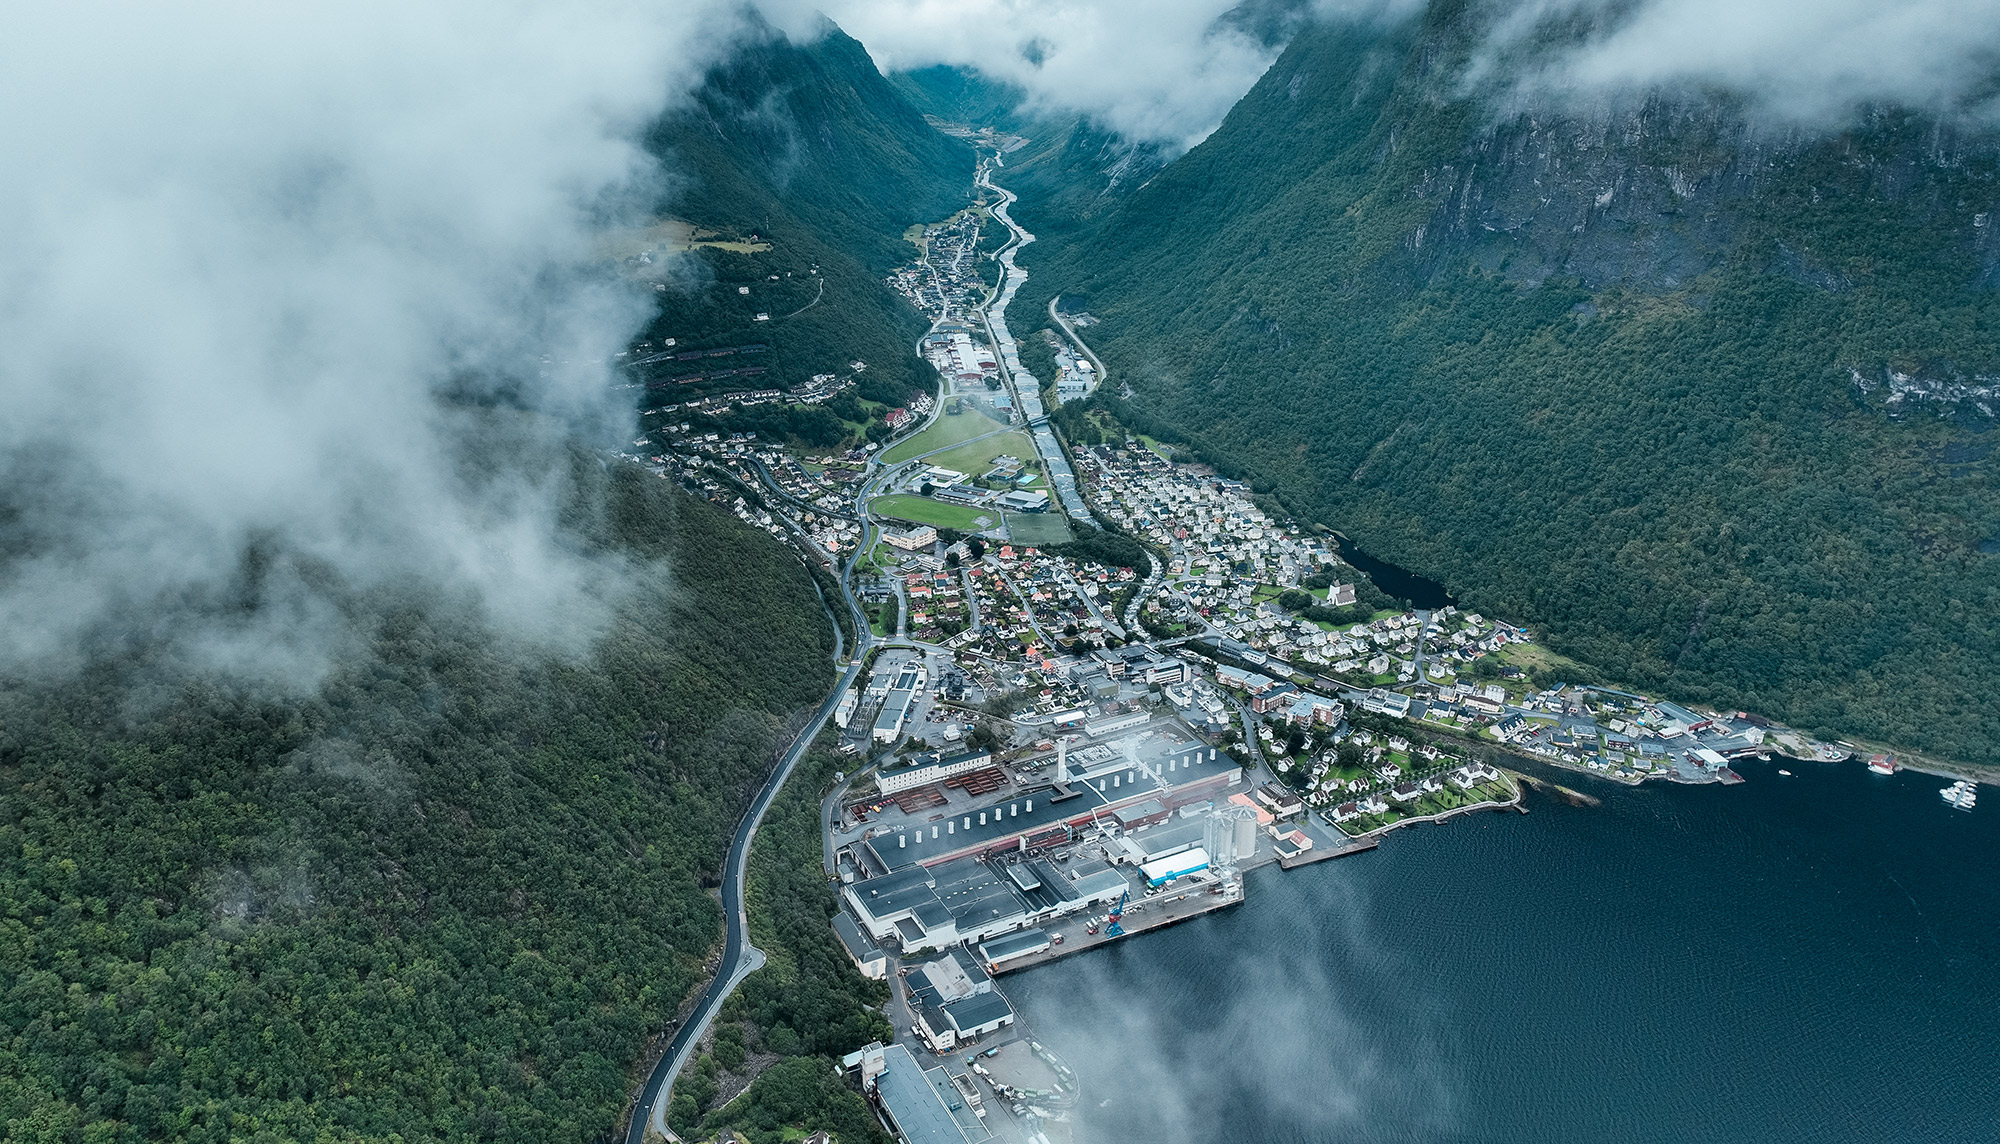 🇳🇴 Hydro pursuing zero-carbon aluminium by testing green hydrogen technology with global potential